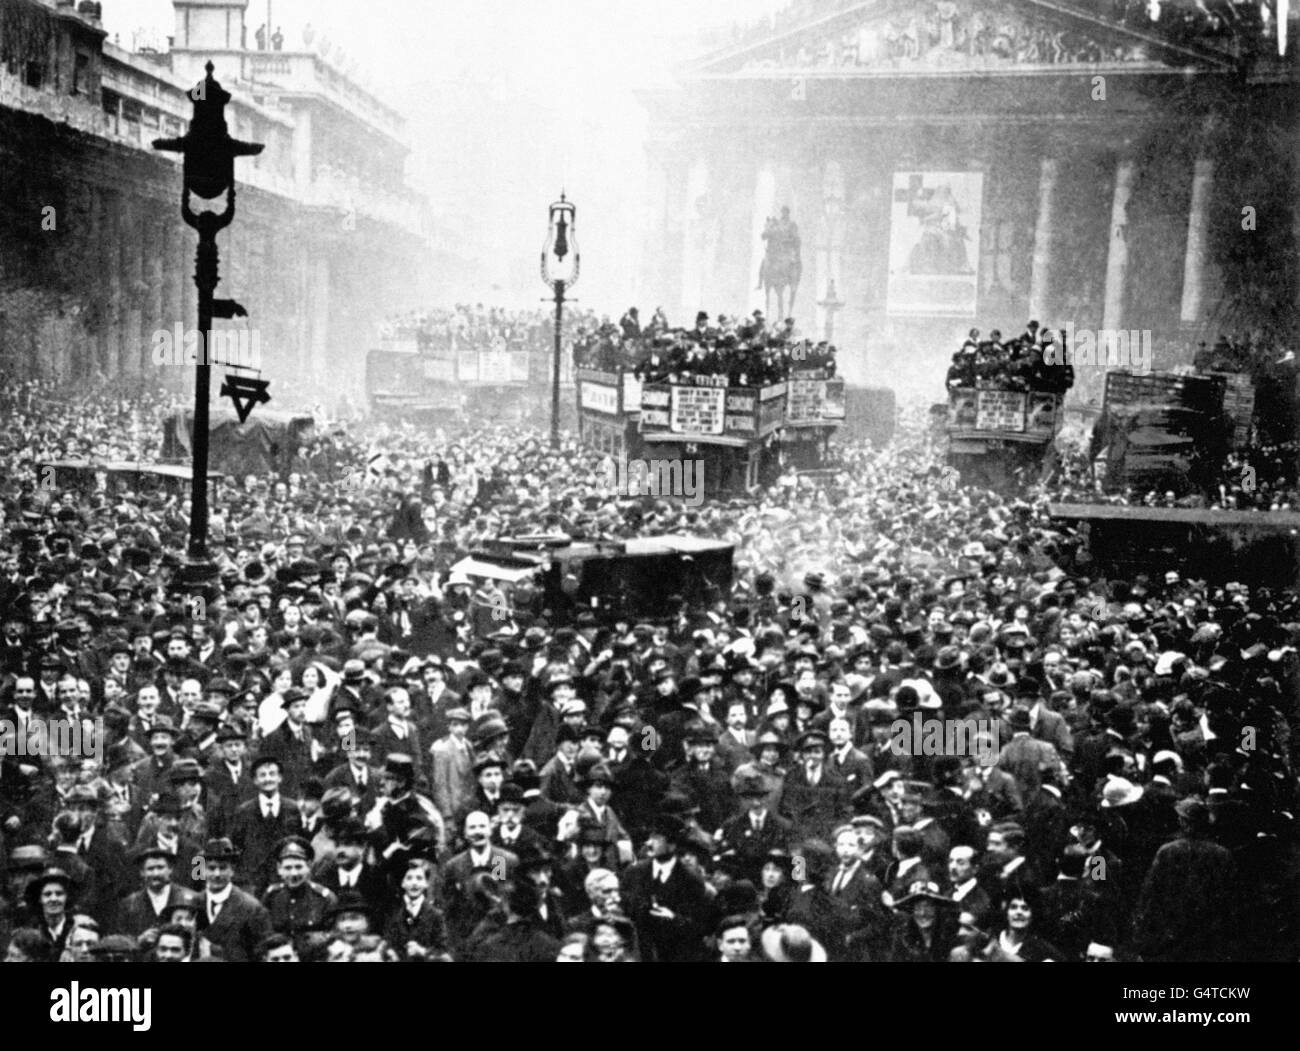 A huge crowd gathered outside the Stock Exchange and the Bank of England in London after the announcement of the Armistice, which heralded the end of the First World War. Stock Photo